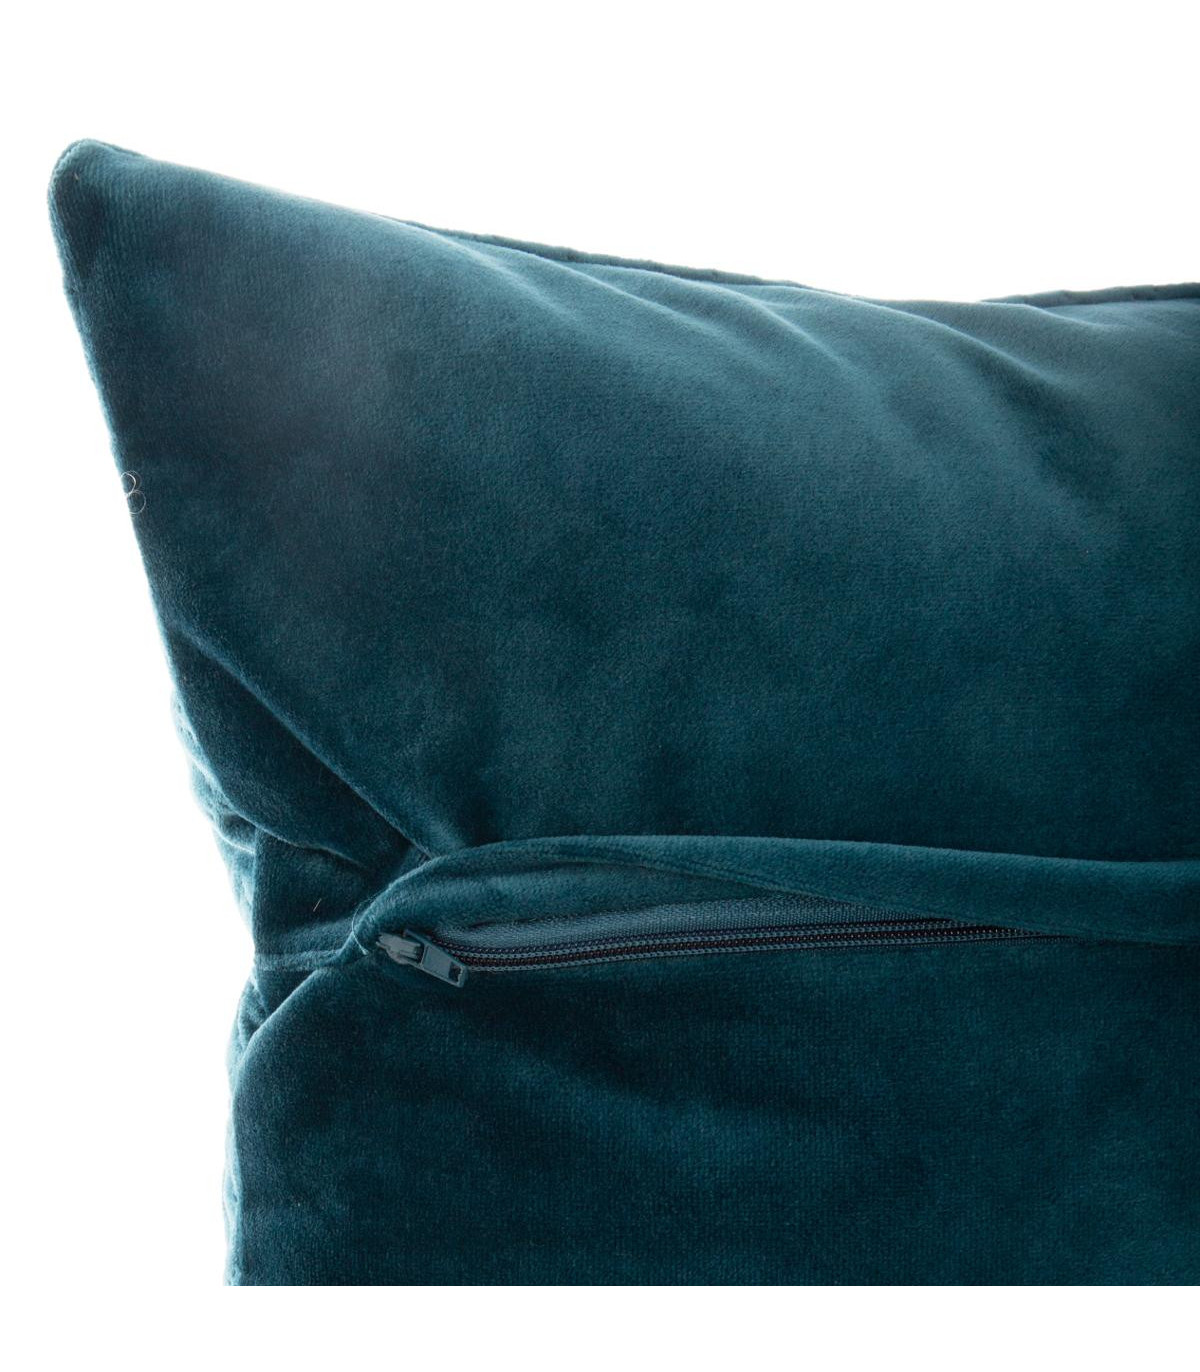 coussin-vel-emb-dolce-ca-40x40 (3)